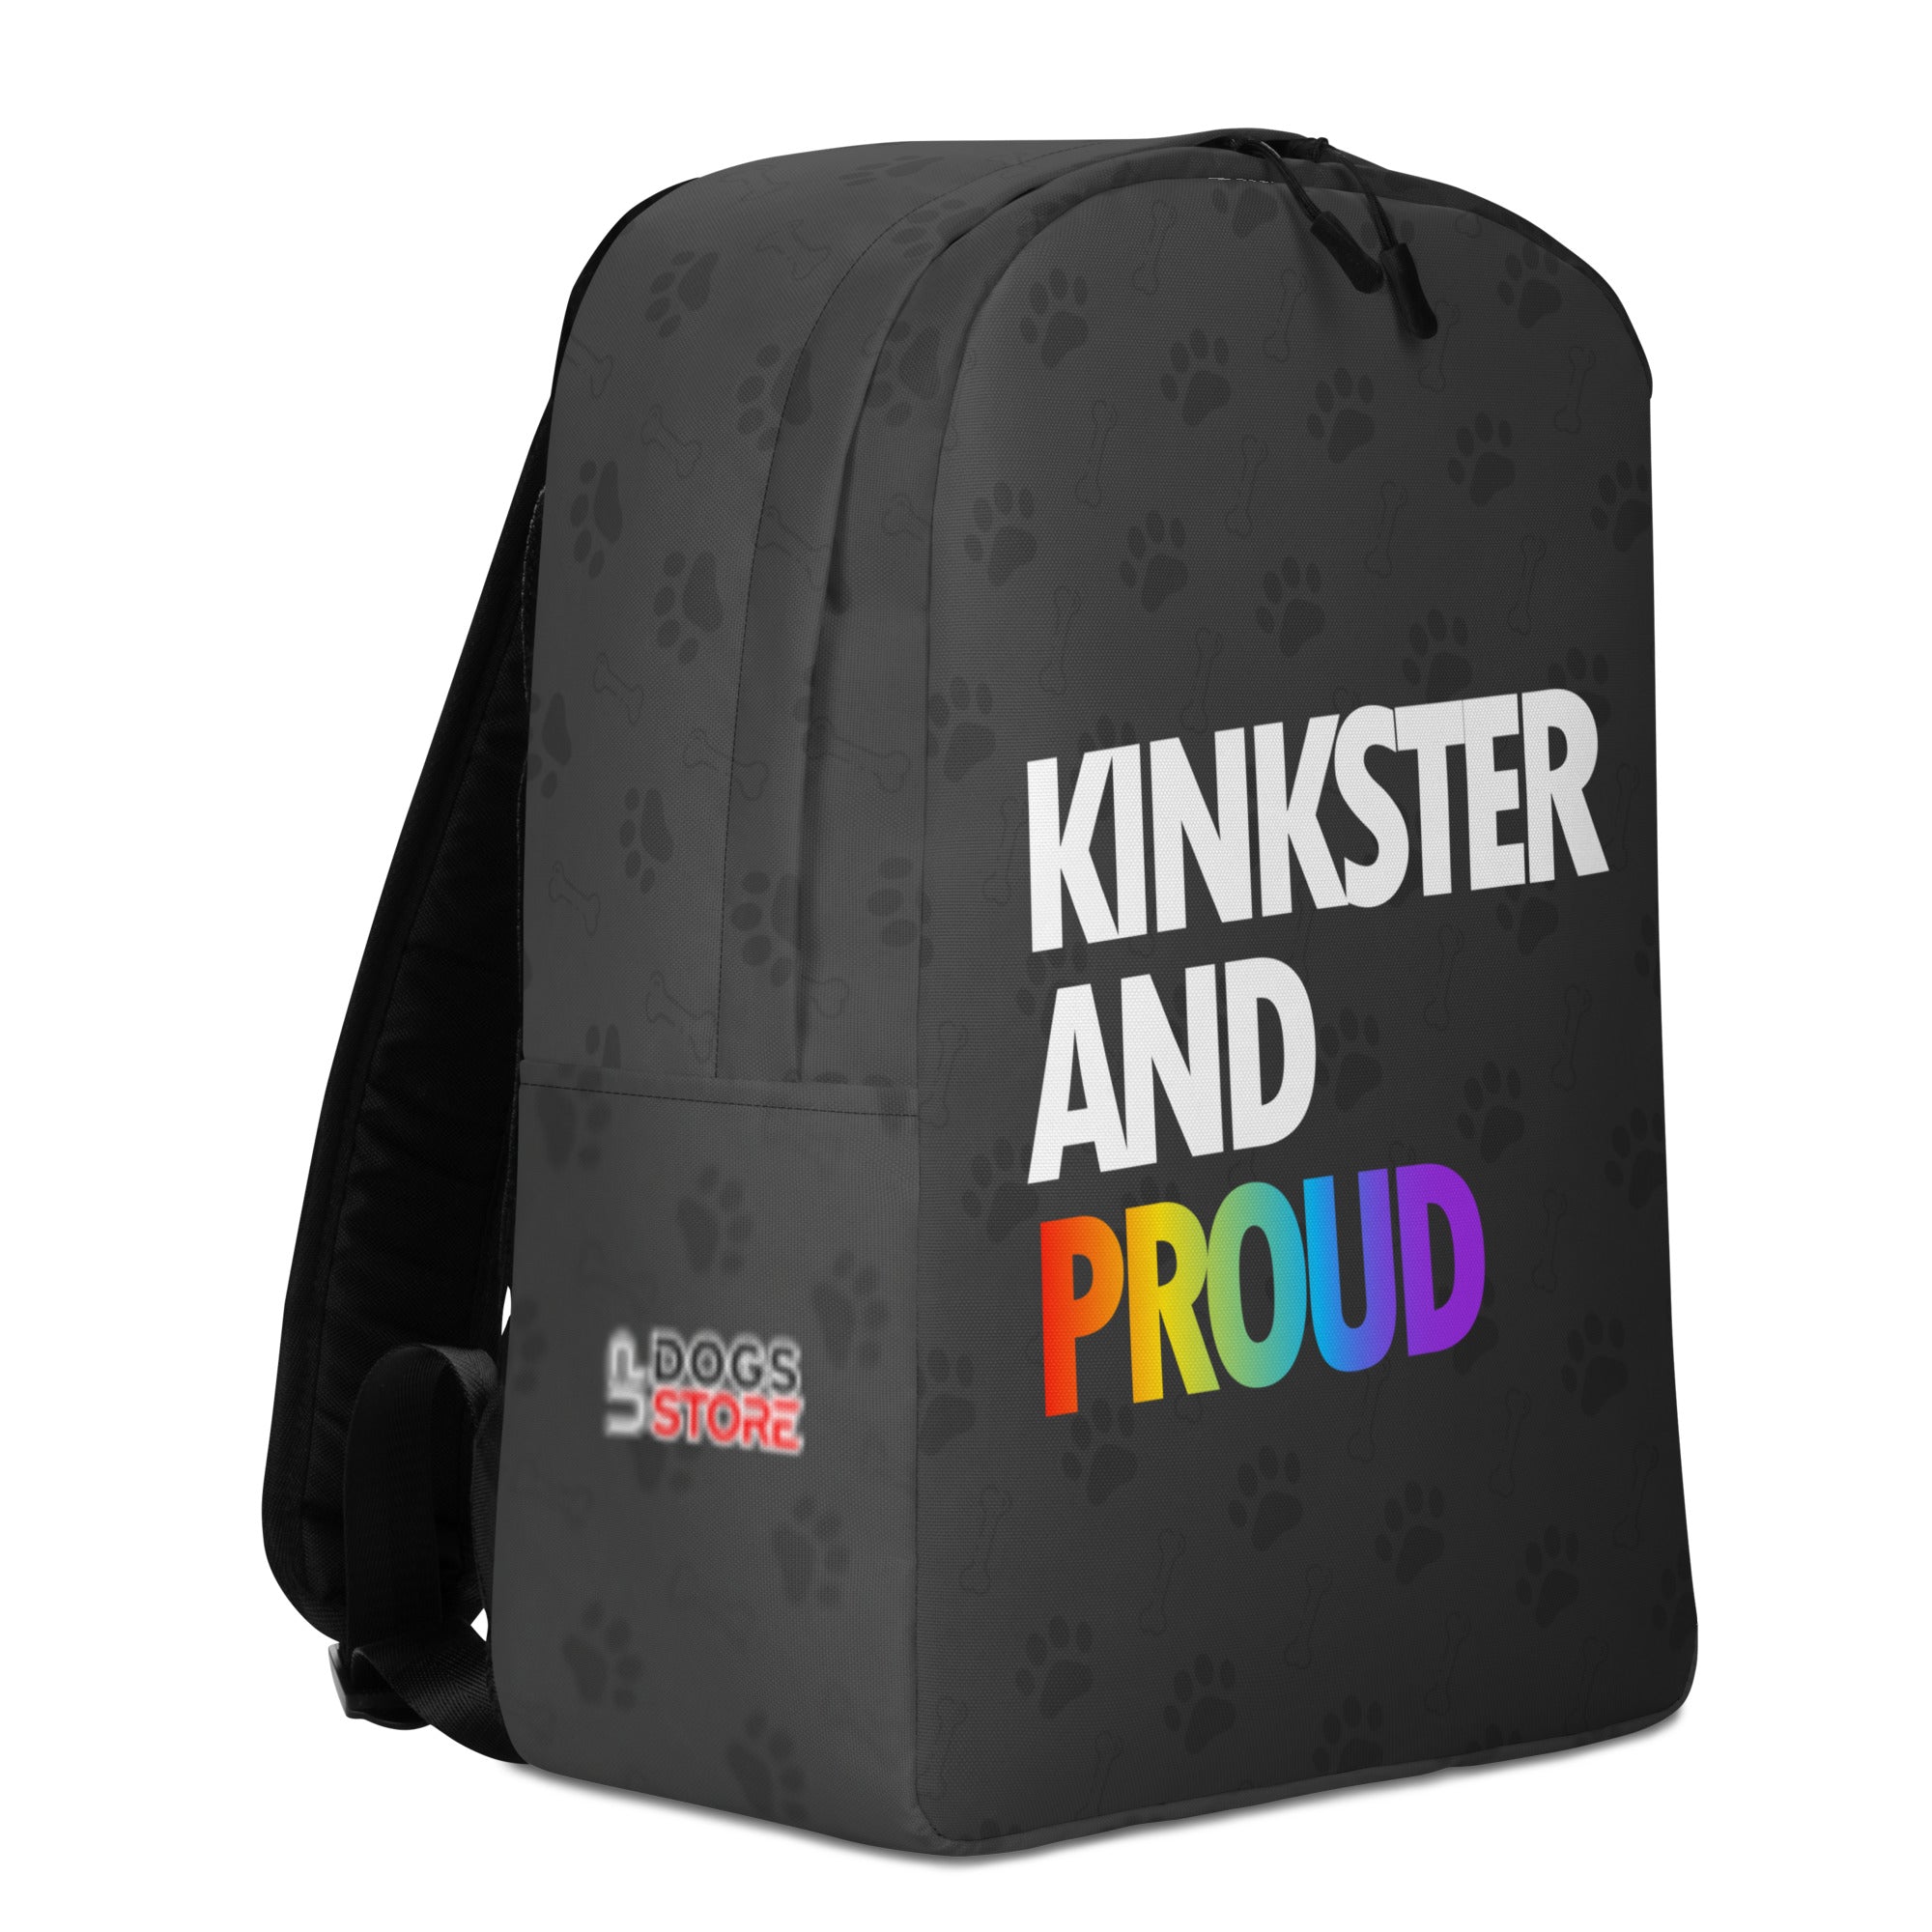 Kinkster and Proud / Backpack